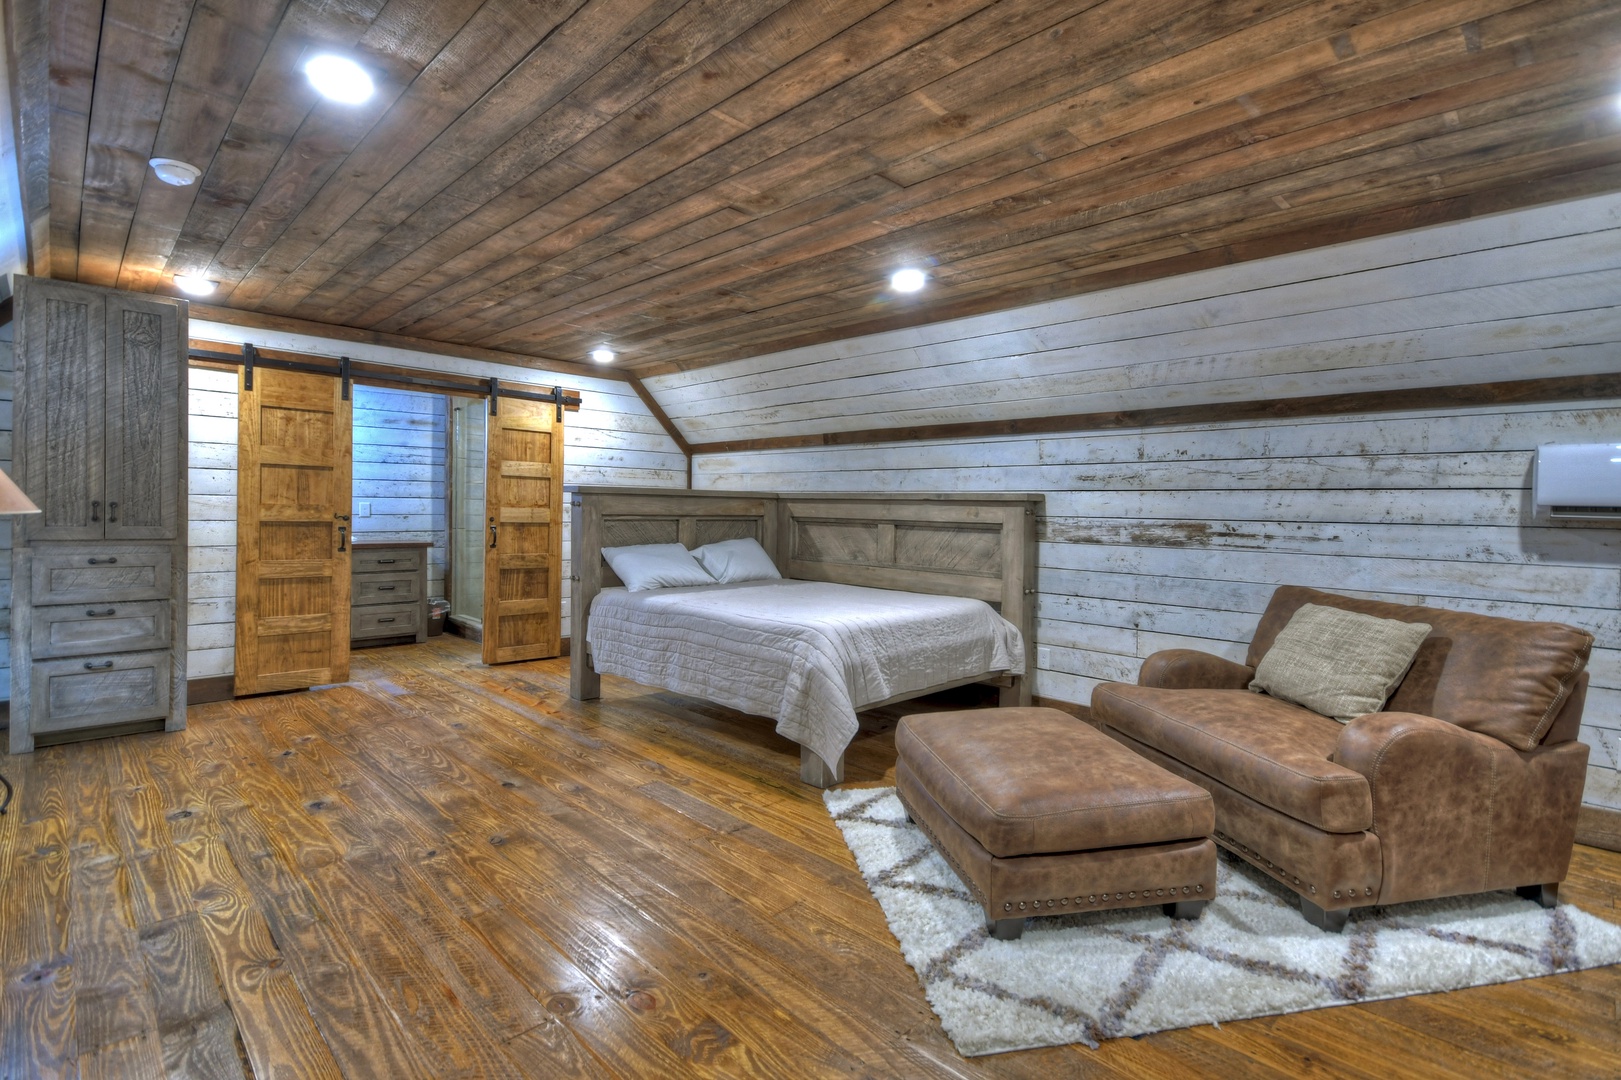 Nottely Island Retreat - Carriage House